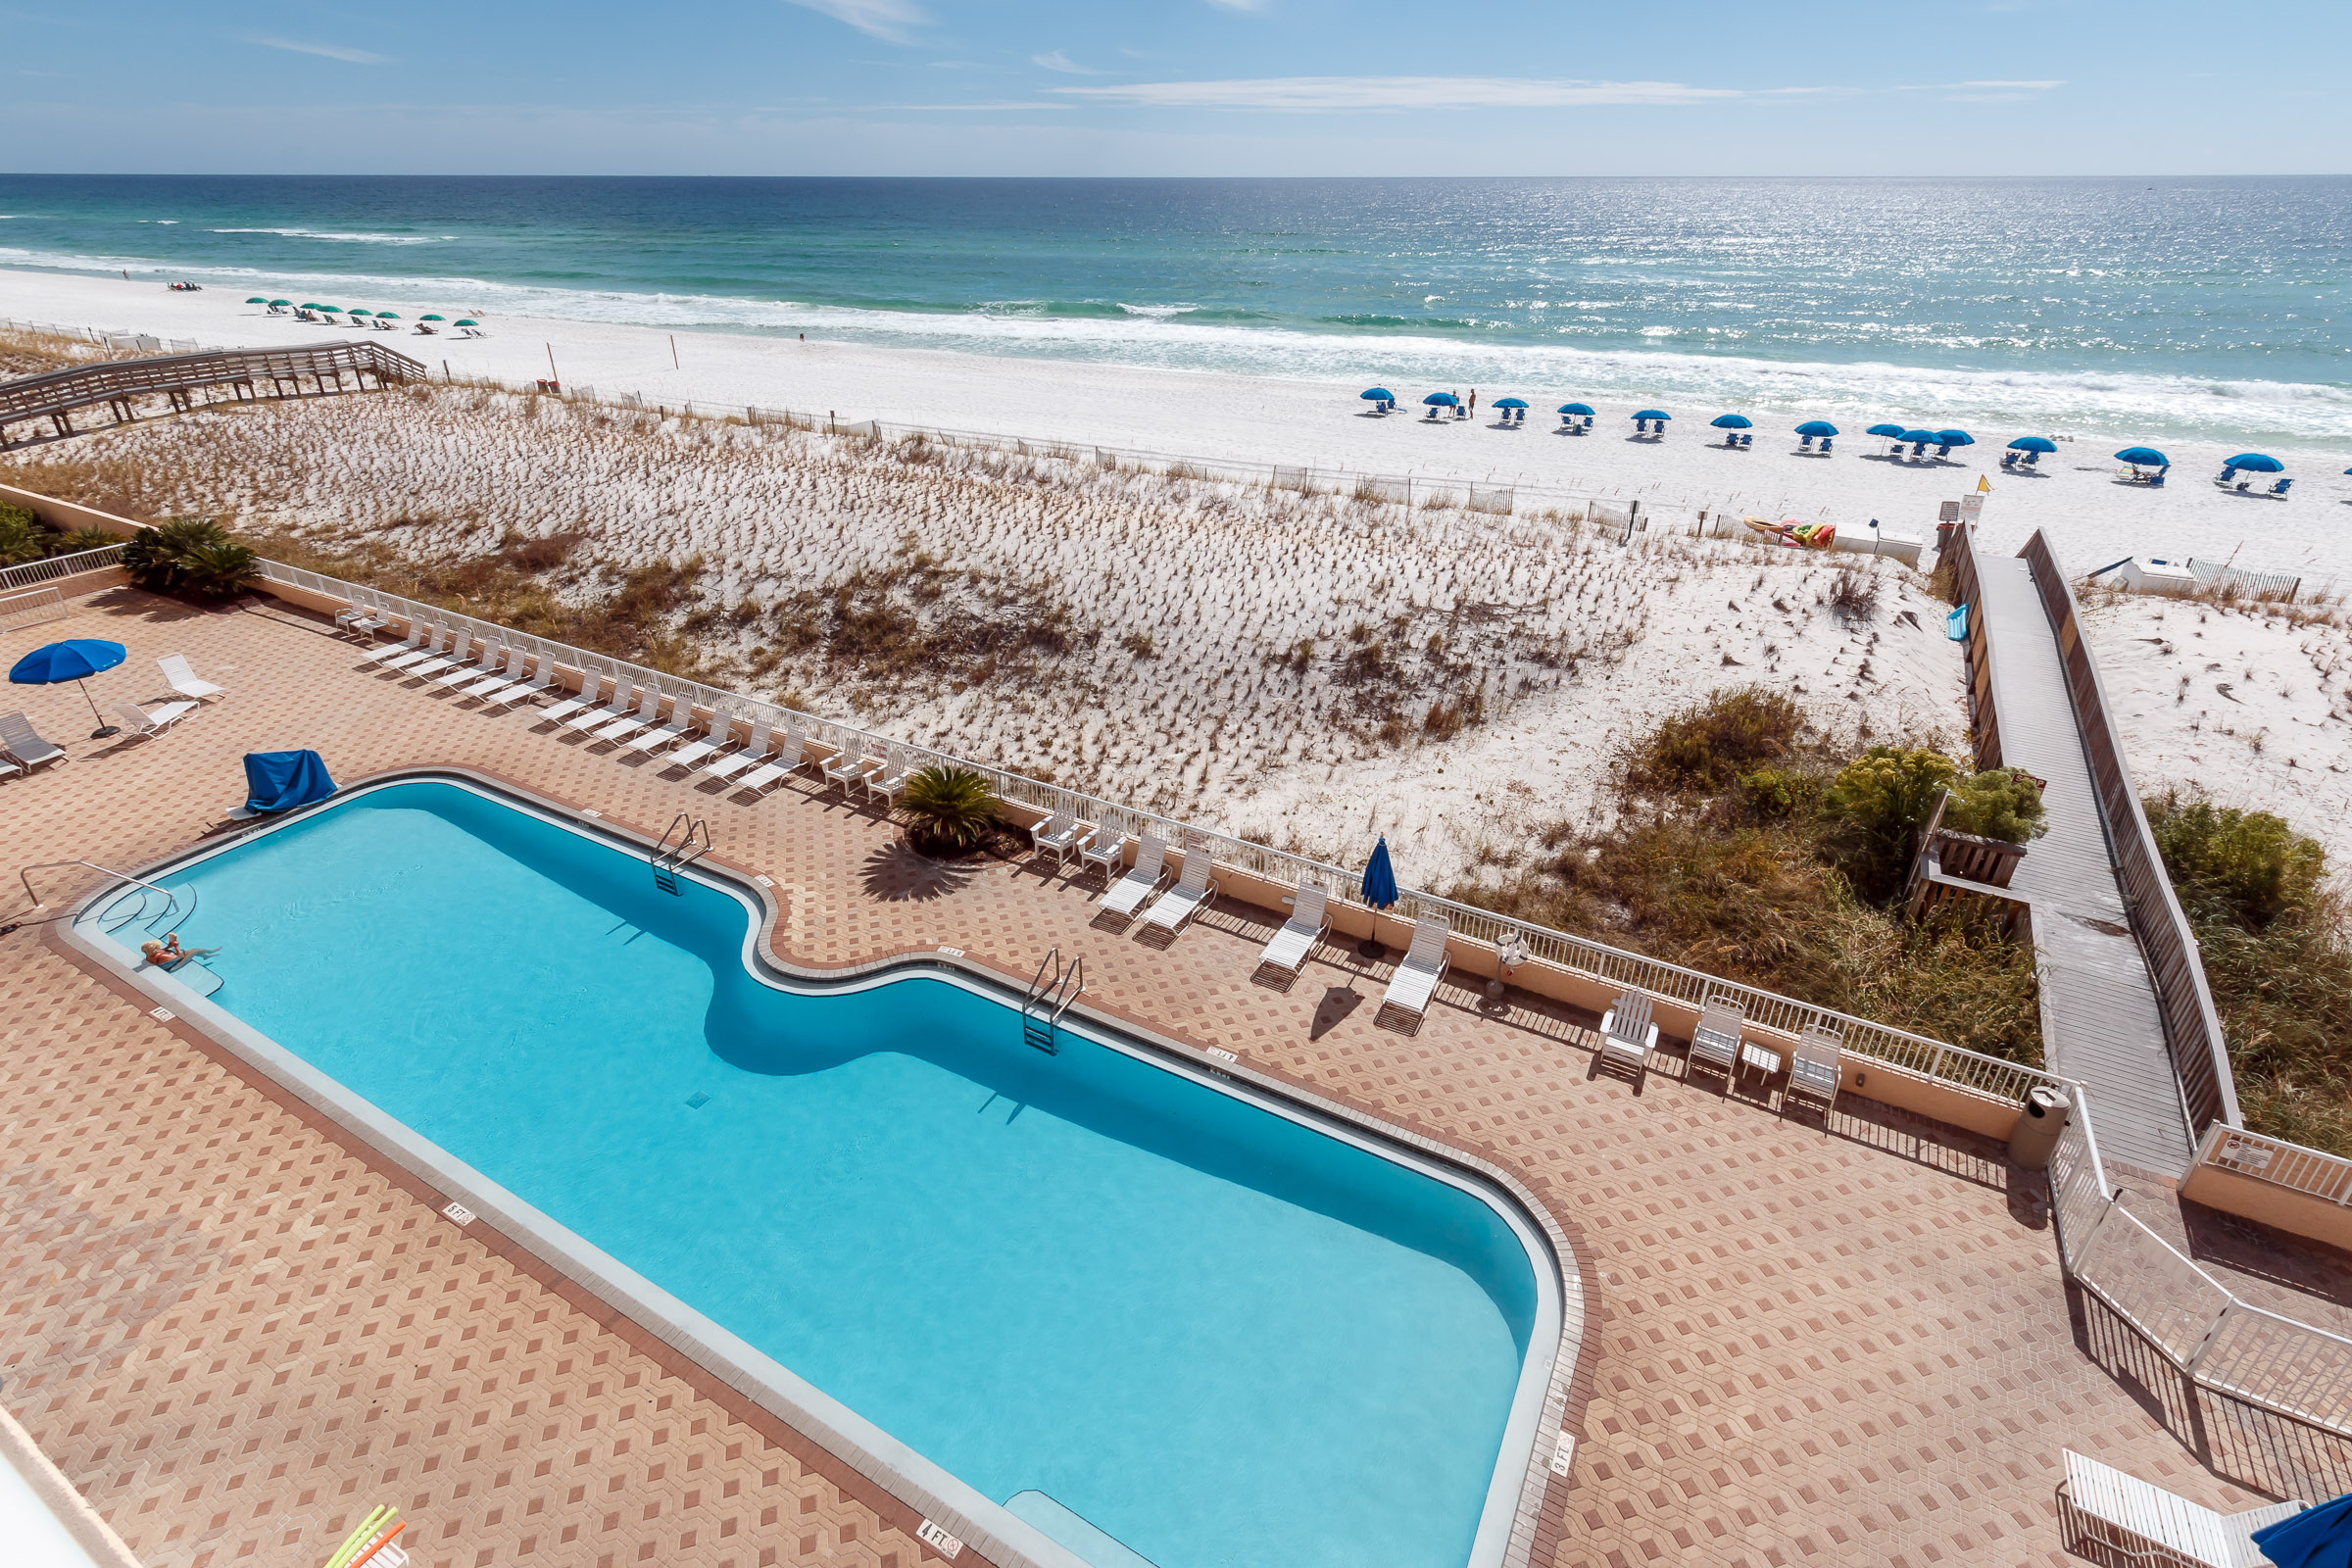 10 Things To Do in Fort Walton Beach, Florida